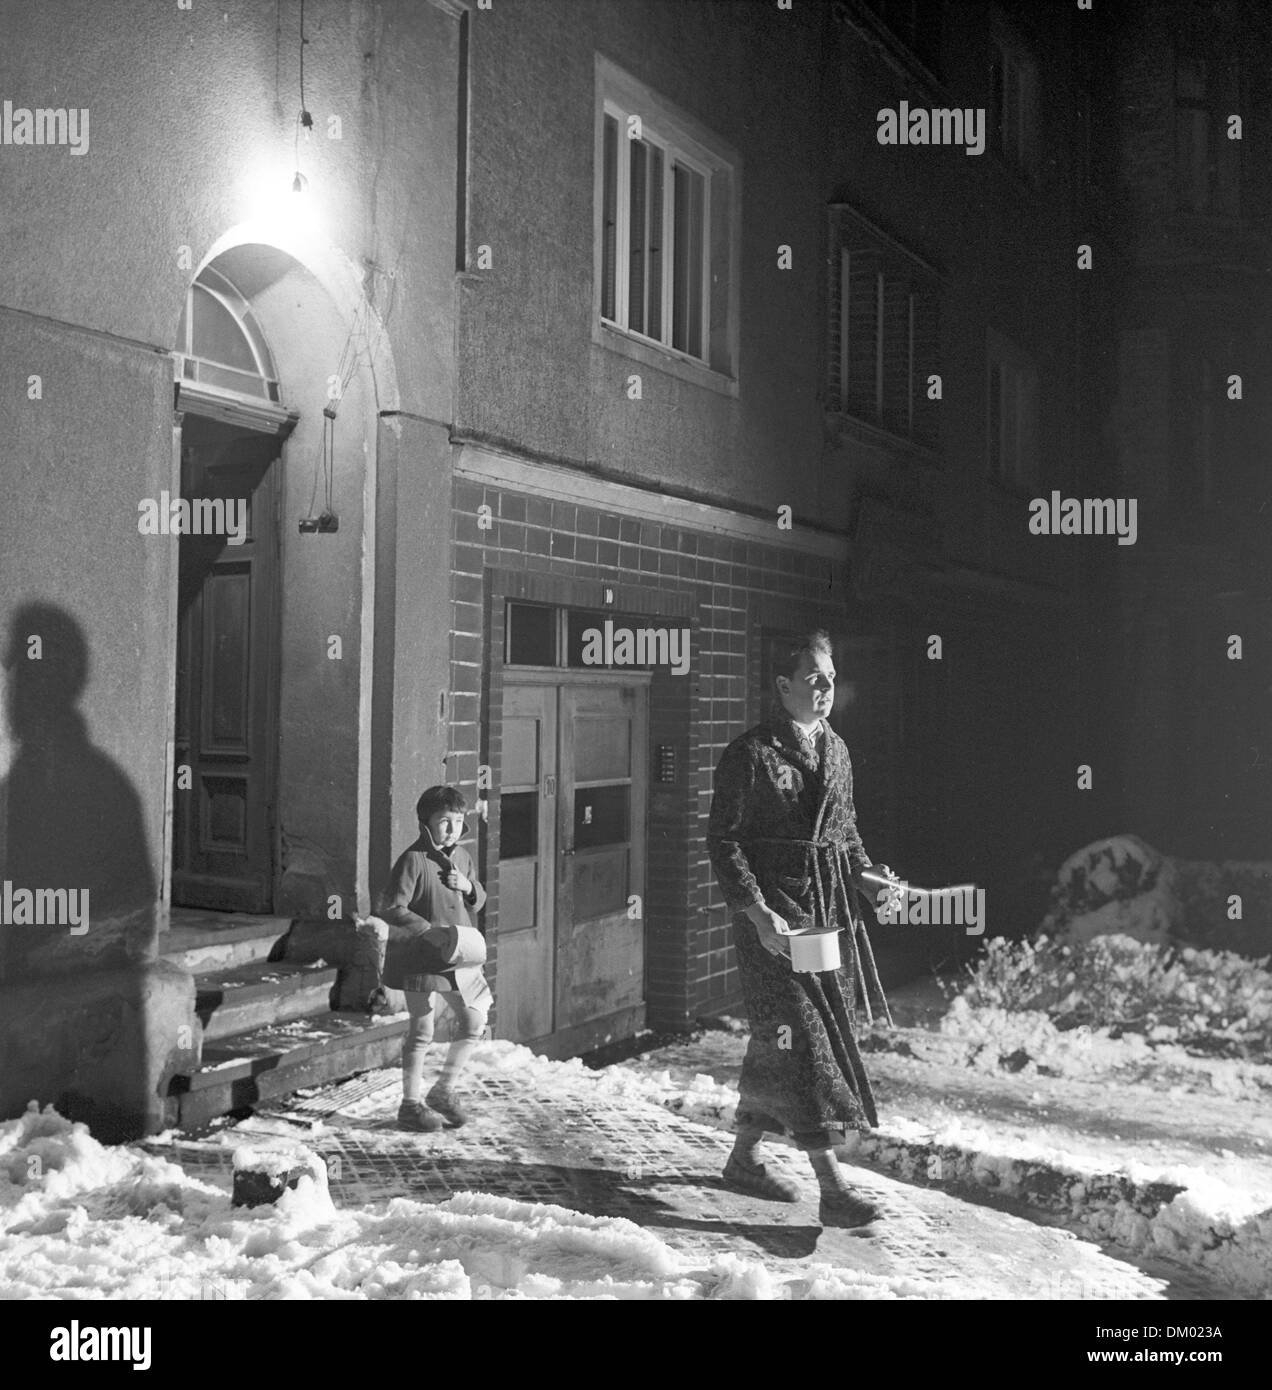 A small boy with a roll of toilet paper and a man with a dressing gown, flashlight, and a chamber pot step outside of an illuminated house . the toilet is frozen, undated photograph from the 1960ies. Photo: Fred Dahlberg Stock Photo